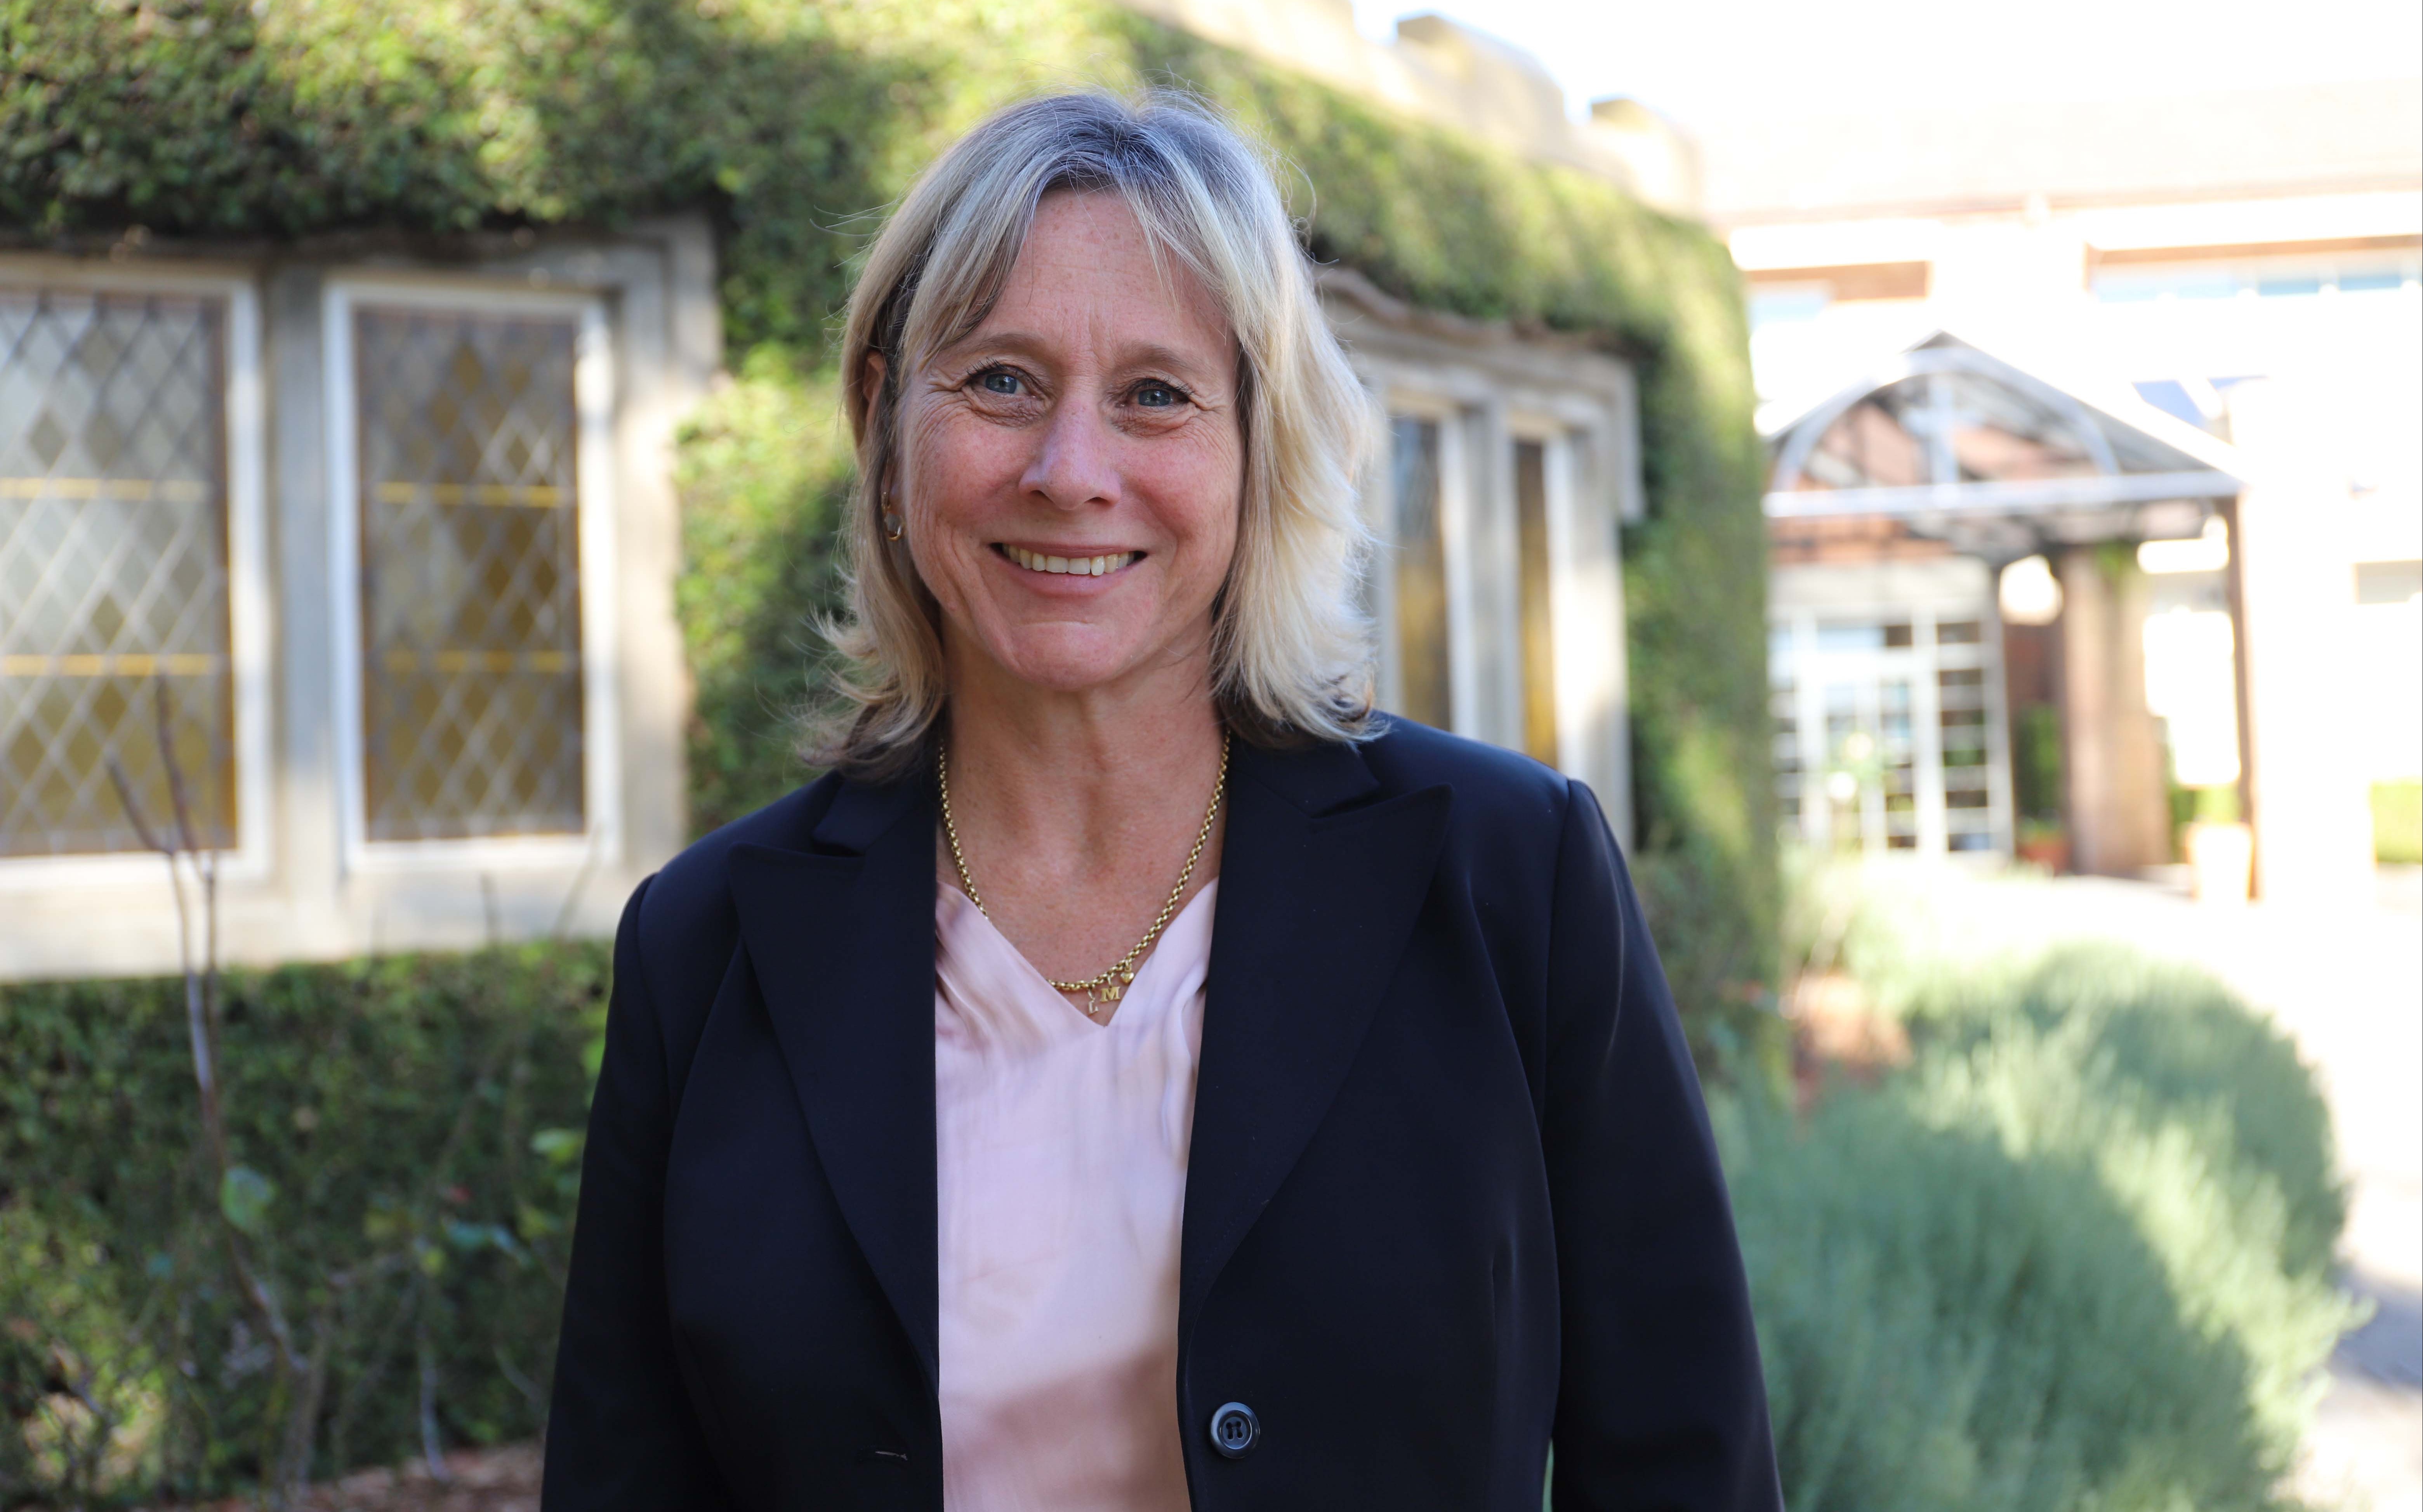 Diana Zihlmann, Director of People and Culture at Loreto Normanhurst